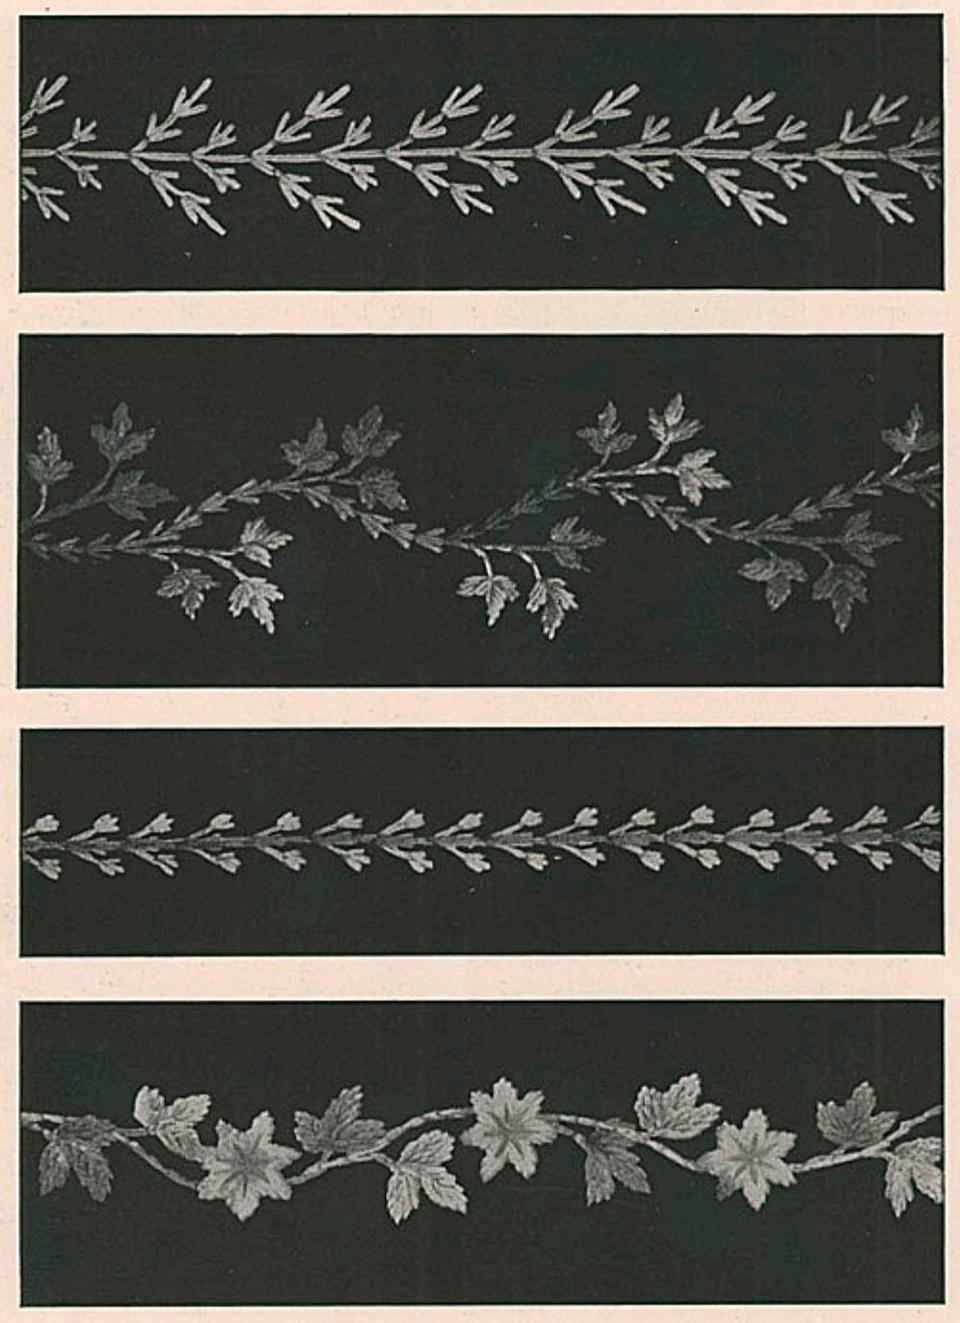 PHOTOGRAPHIC EXAMPLES OF STITCHING PERFORMED ON MACHINE No. 31-4.